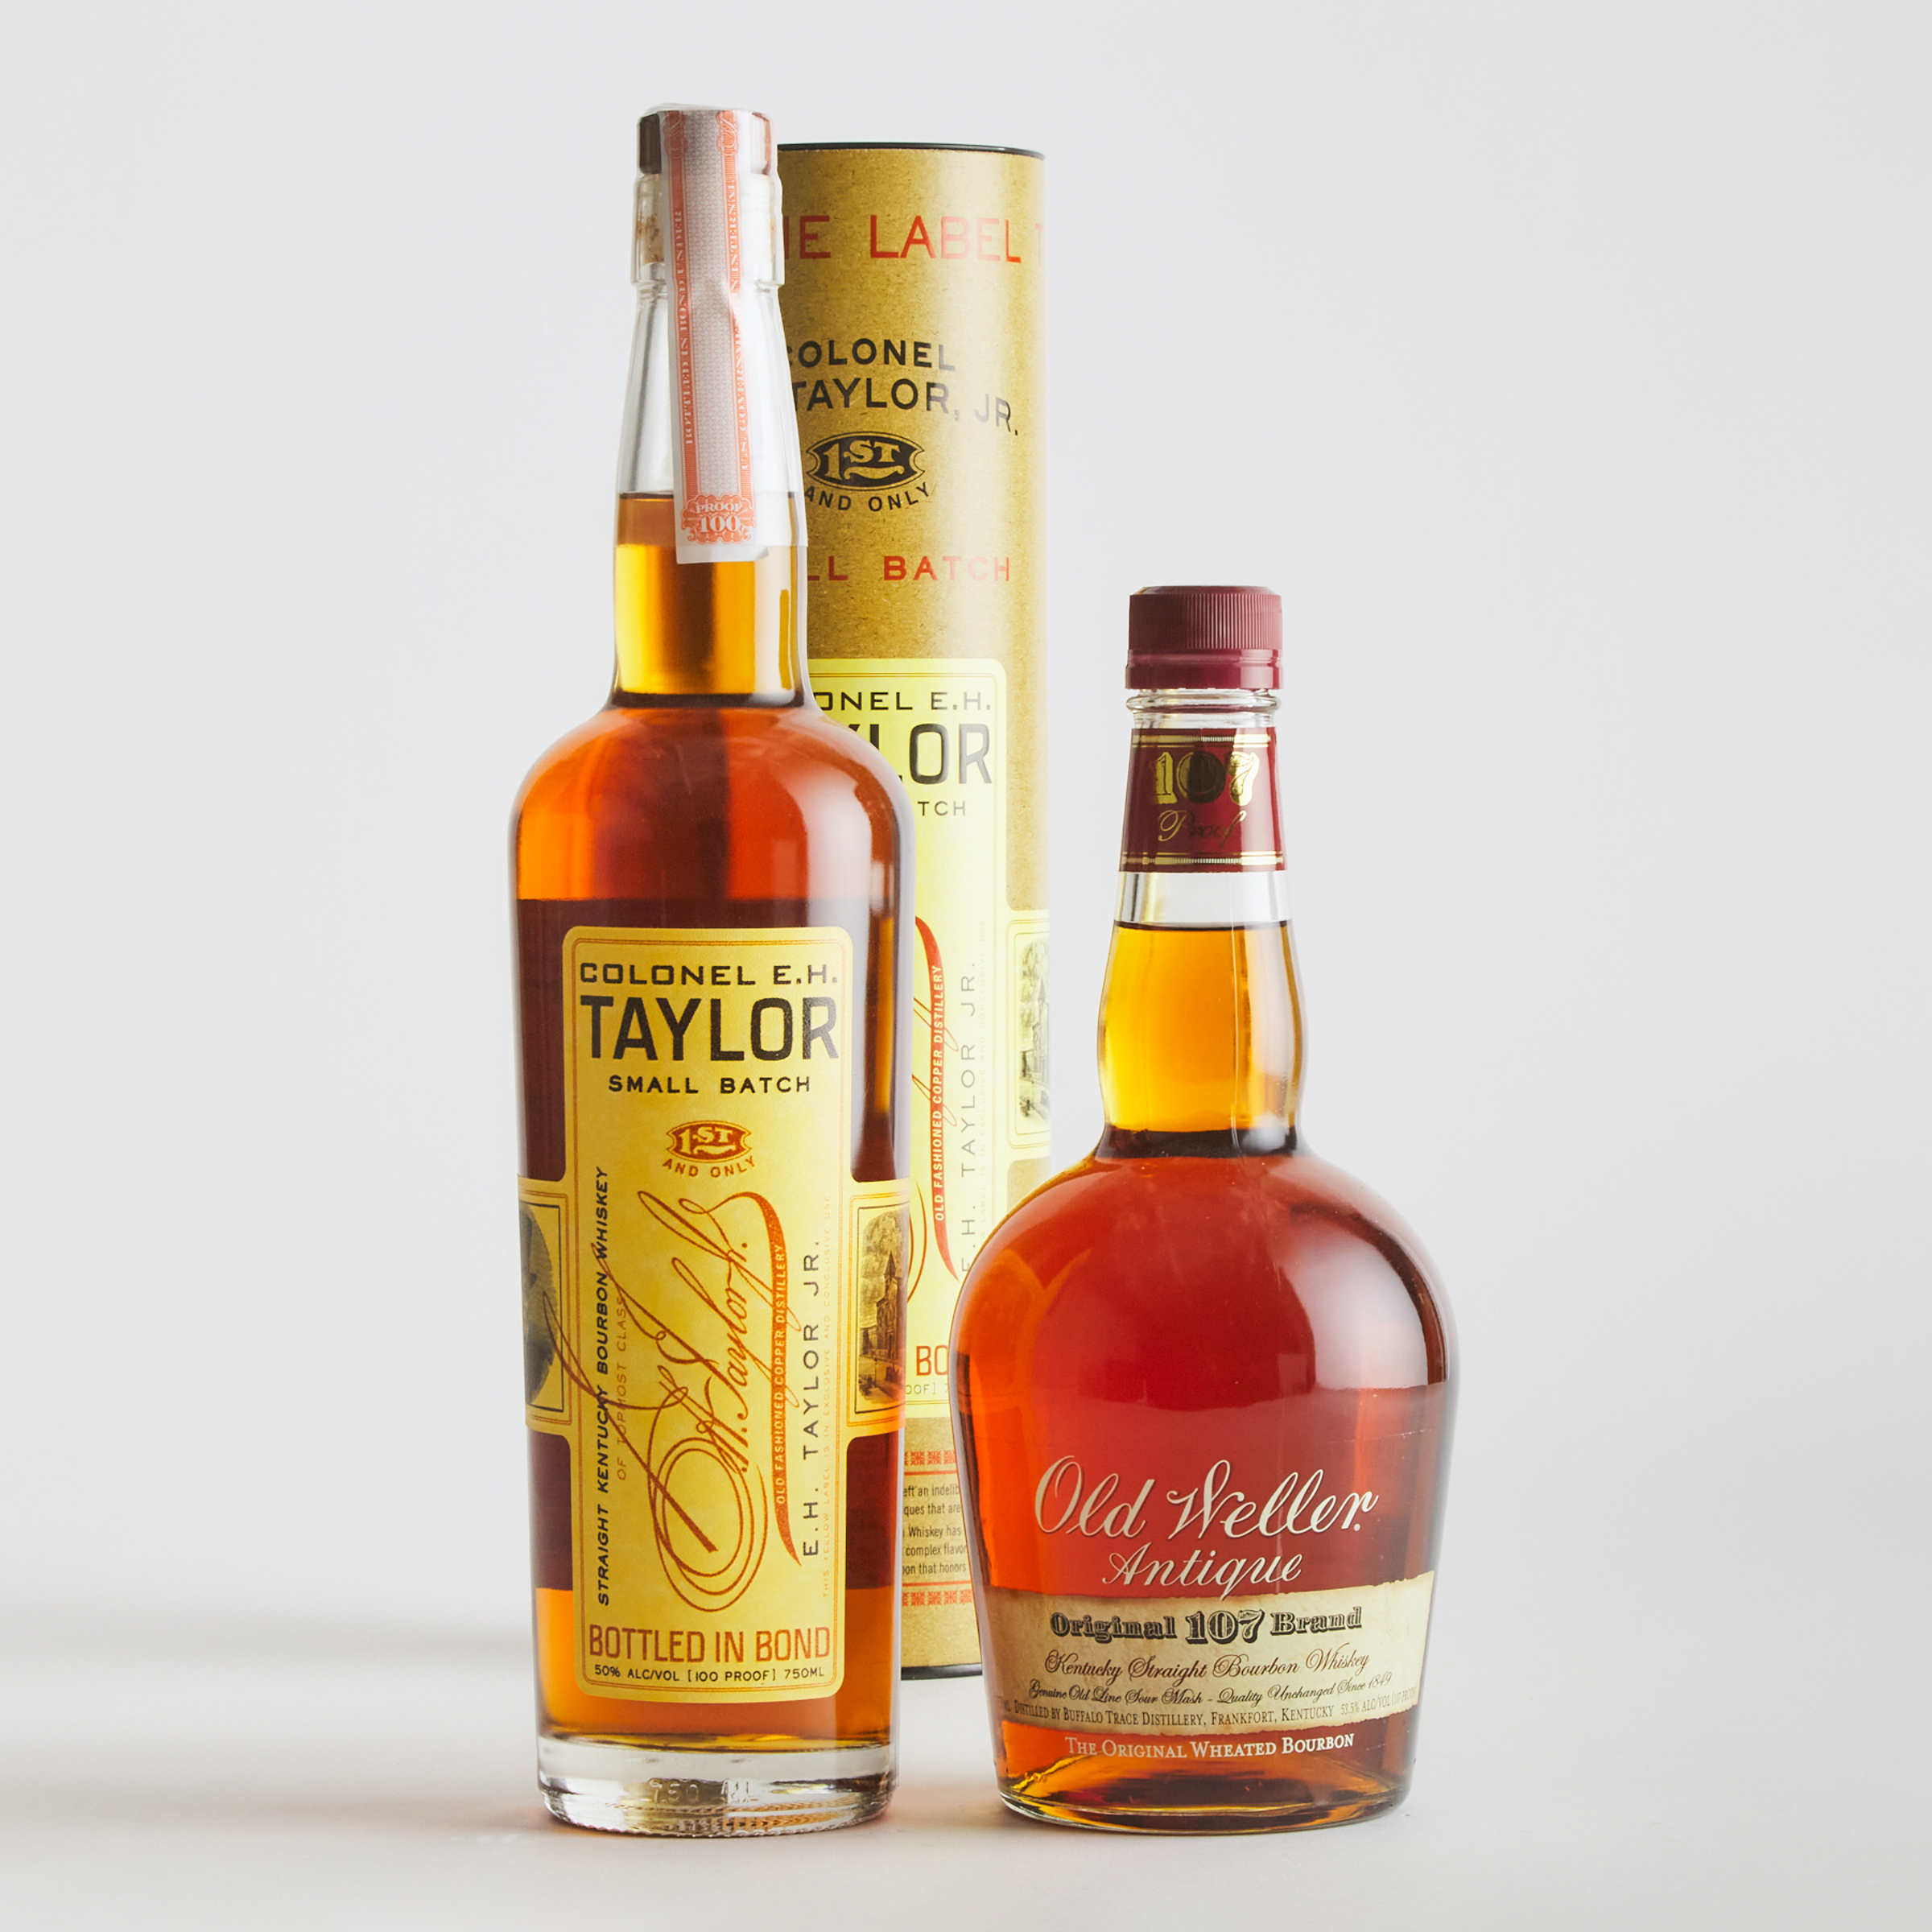 COLONEL E.H.TAYLOR JR. KENTUCKY STRAIGHT BOURBON WHISKEY (ONE 750 ML)
OLD WELLER ANTIQUE ORIGINAL 107 BRAND KENTUCKY STRAIGHT BOURBON WHISKEY (ONE 750 ML)